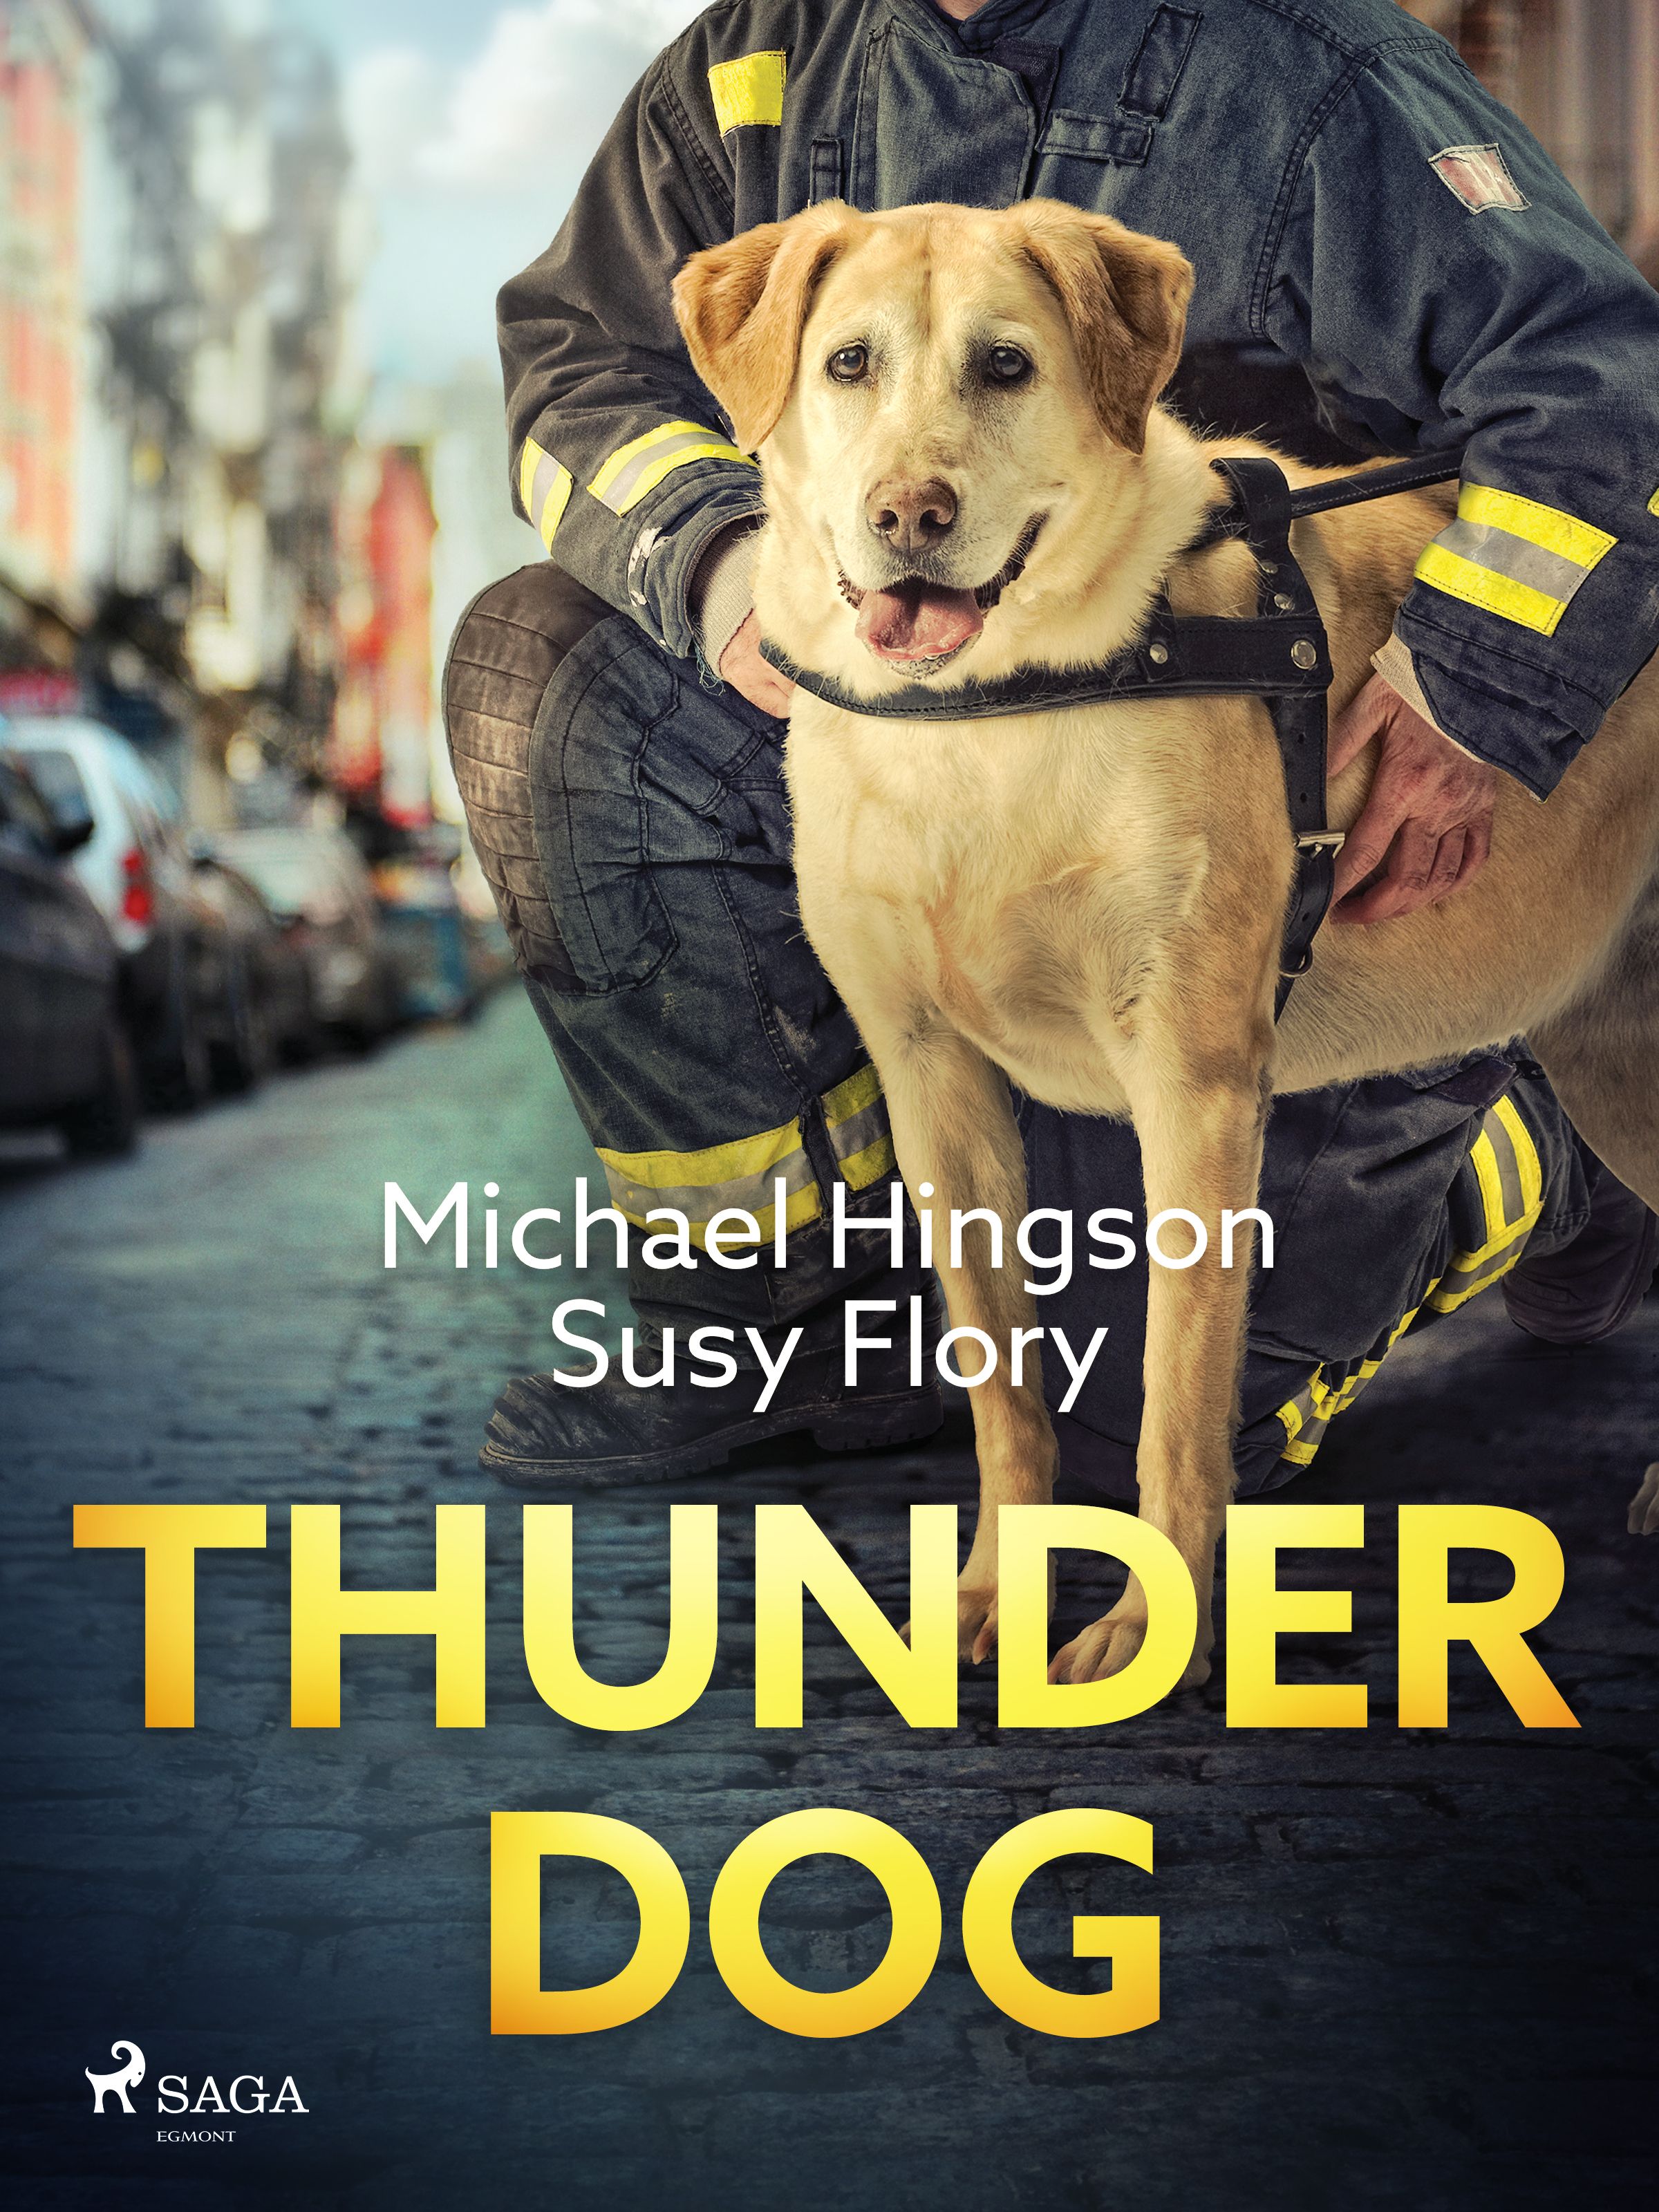 Thunder dog, eBook by Susy Flory, Michael Hingson